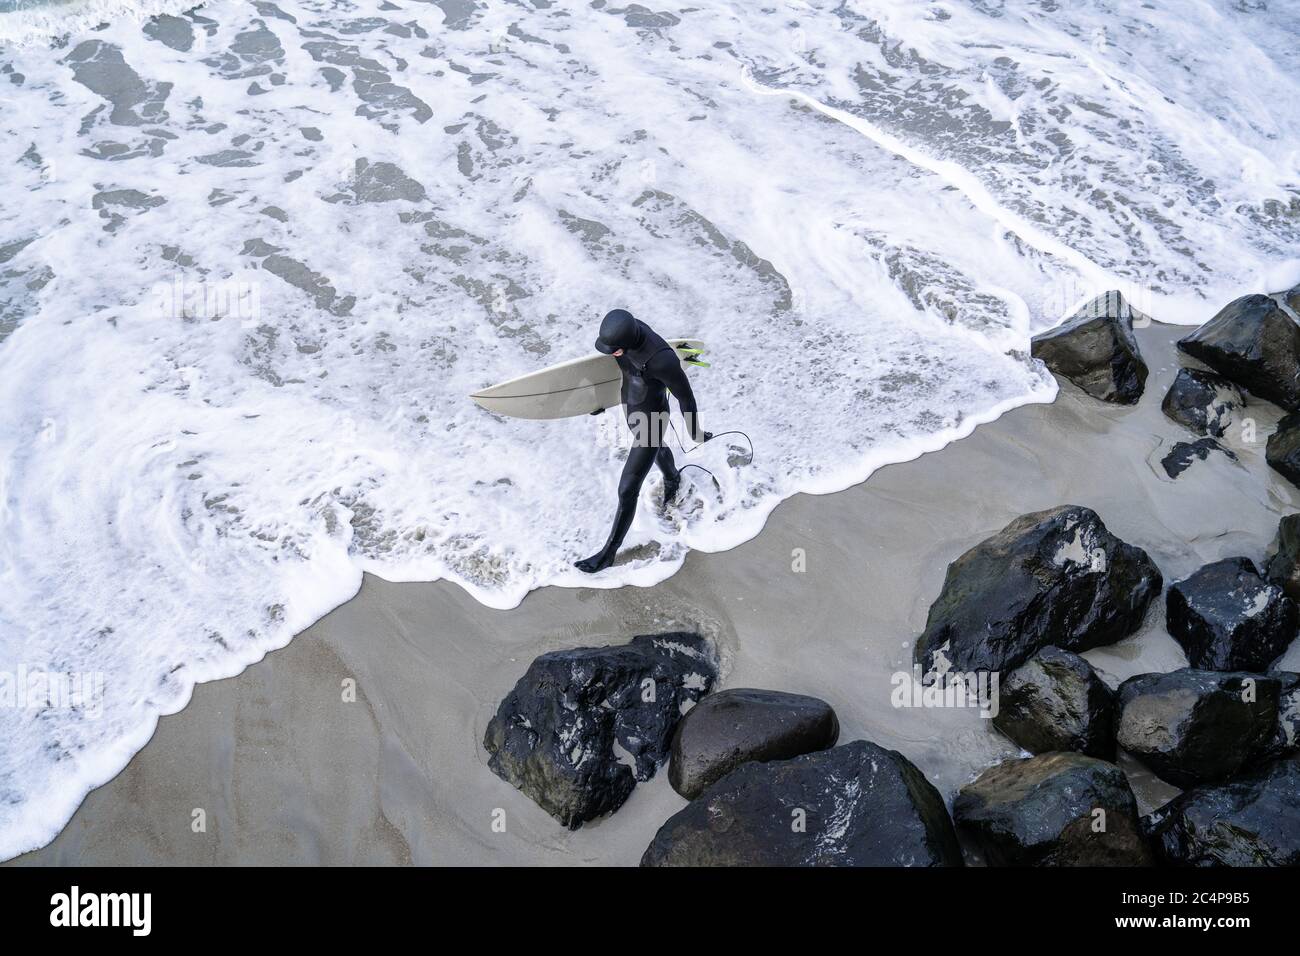 Surfer wearing wetsuit with surfboard watching ocean waves crash over rocks at St. Clair beach, Dunedin, New Zealand. Stock Photo